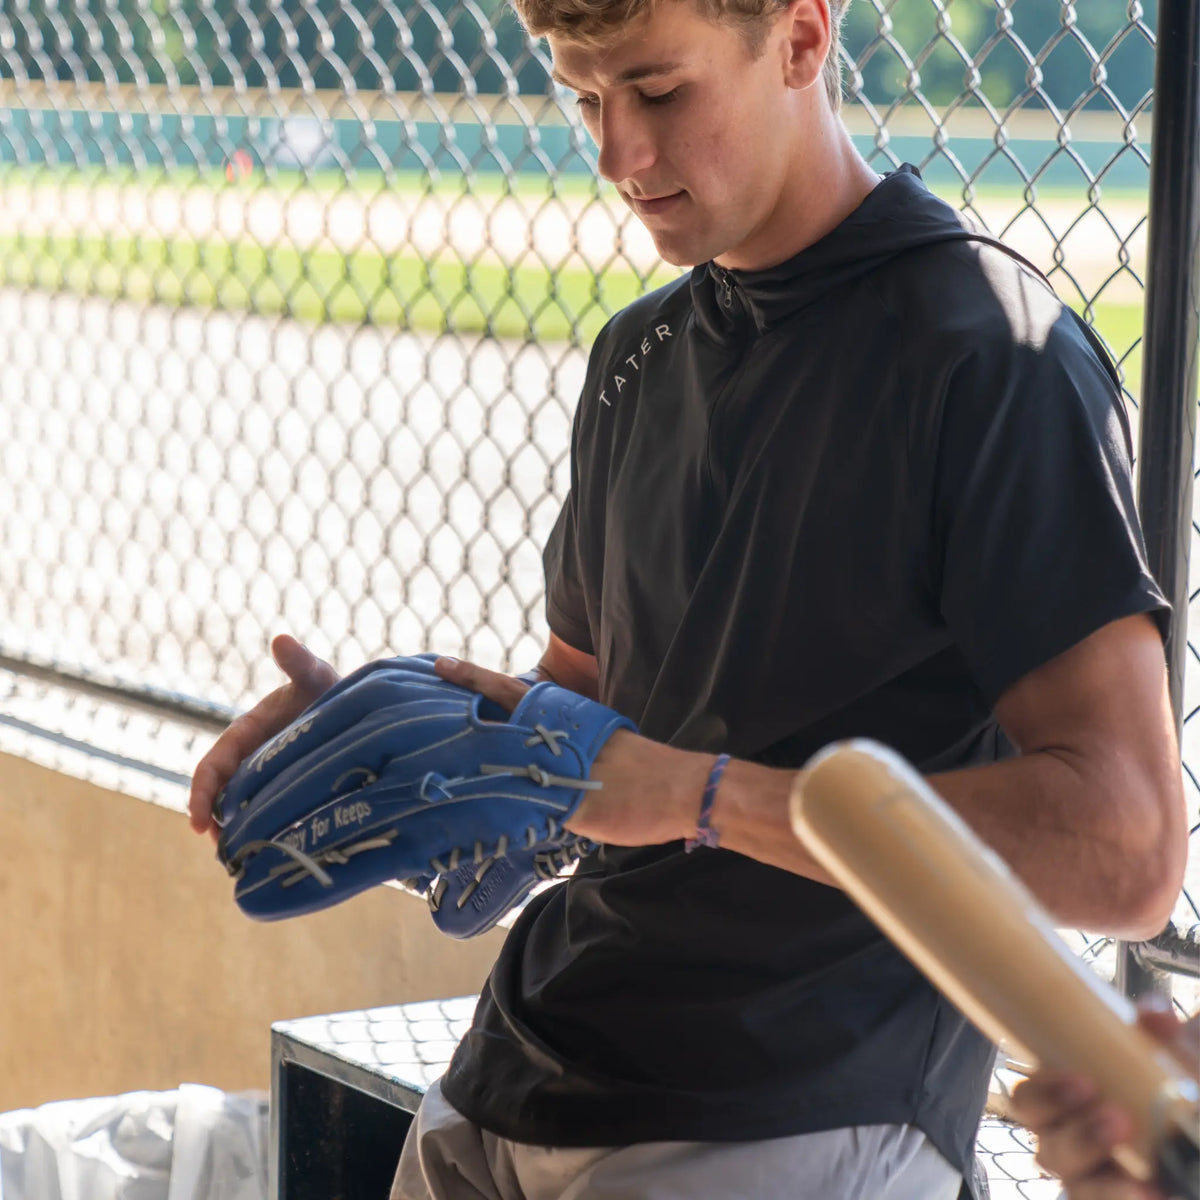 A baseball player is seen wearing a black short-sleeve BP (batting practice) hoodie from Tater Baseball. He is holding a blue outfielder&#39;s glove and a natural wood bat, indicating he&#39;s possibly preparing for practice or a game.